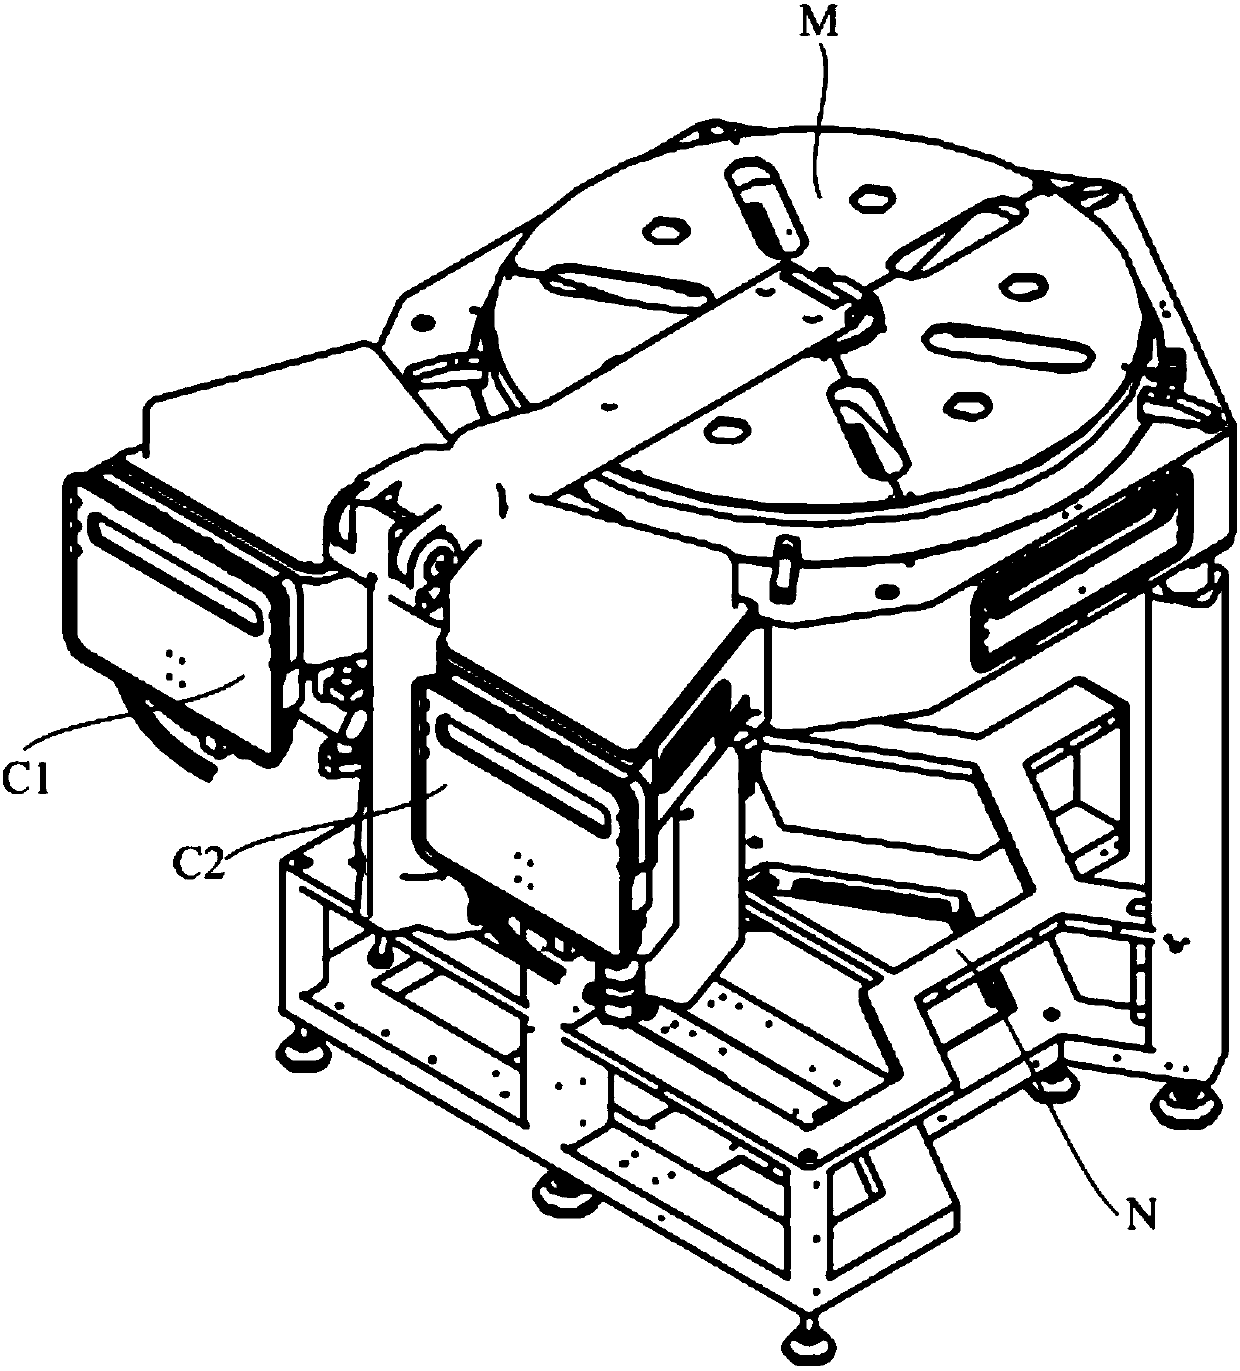 Wafer annealing device